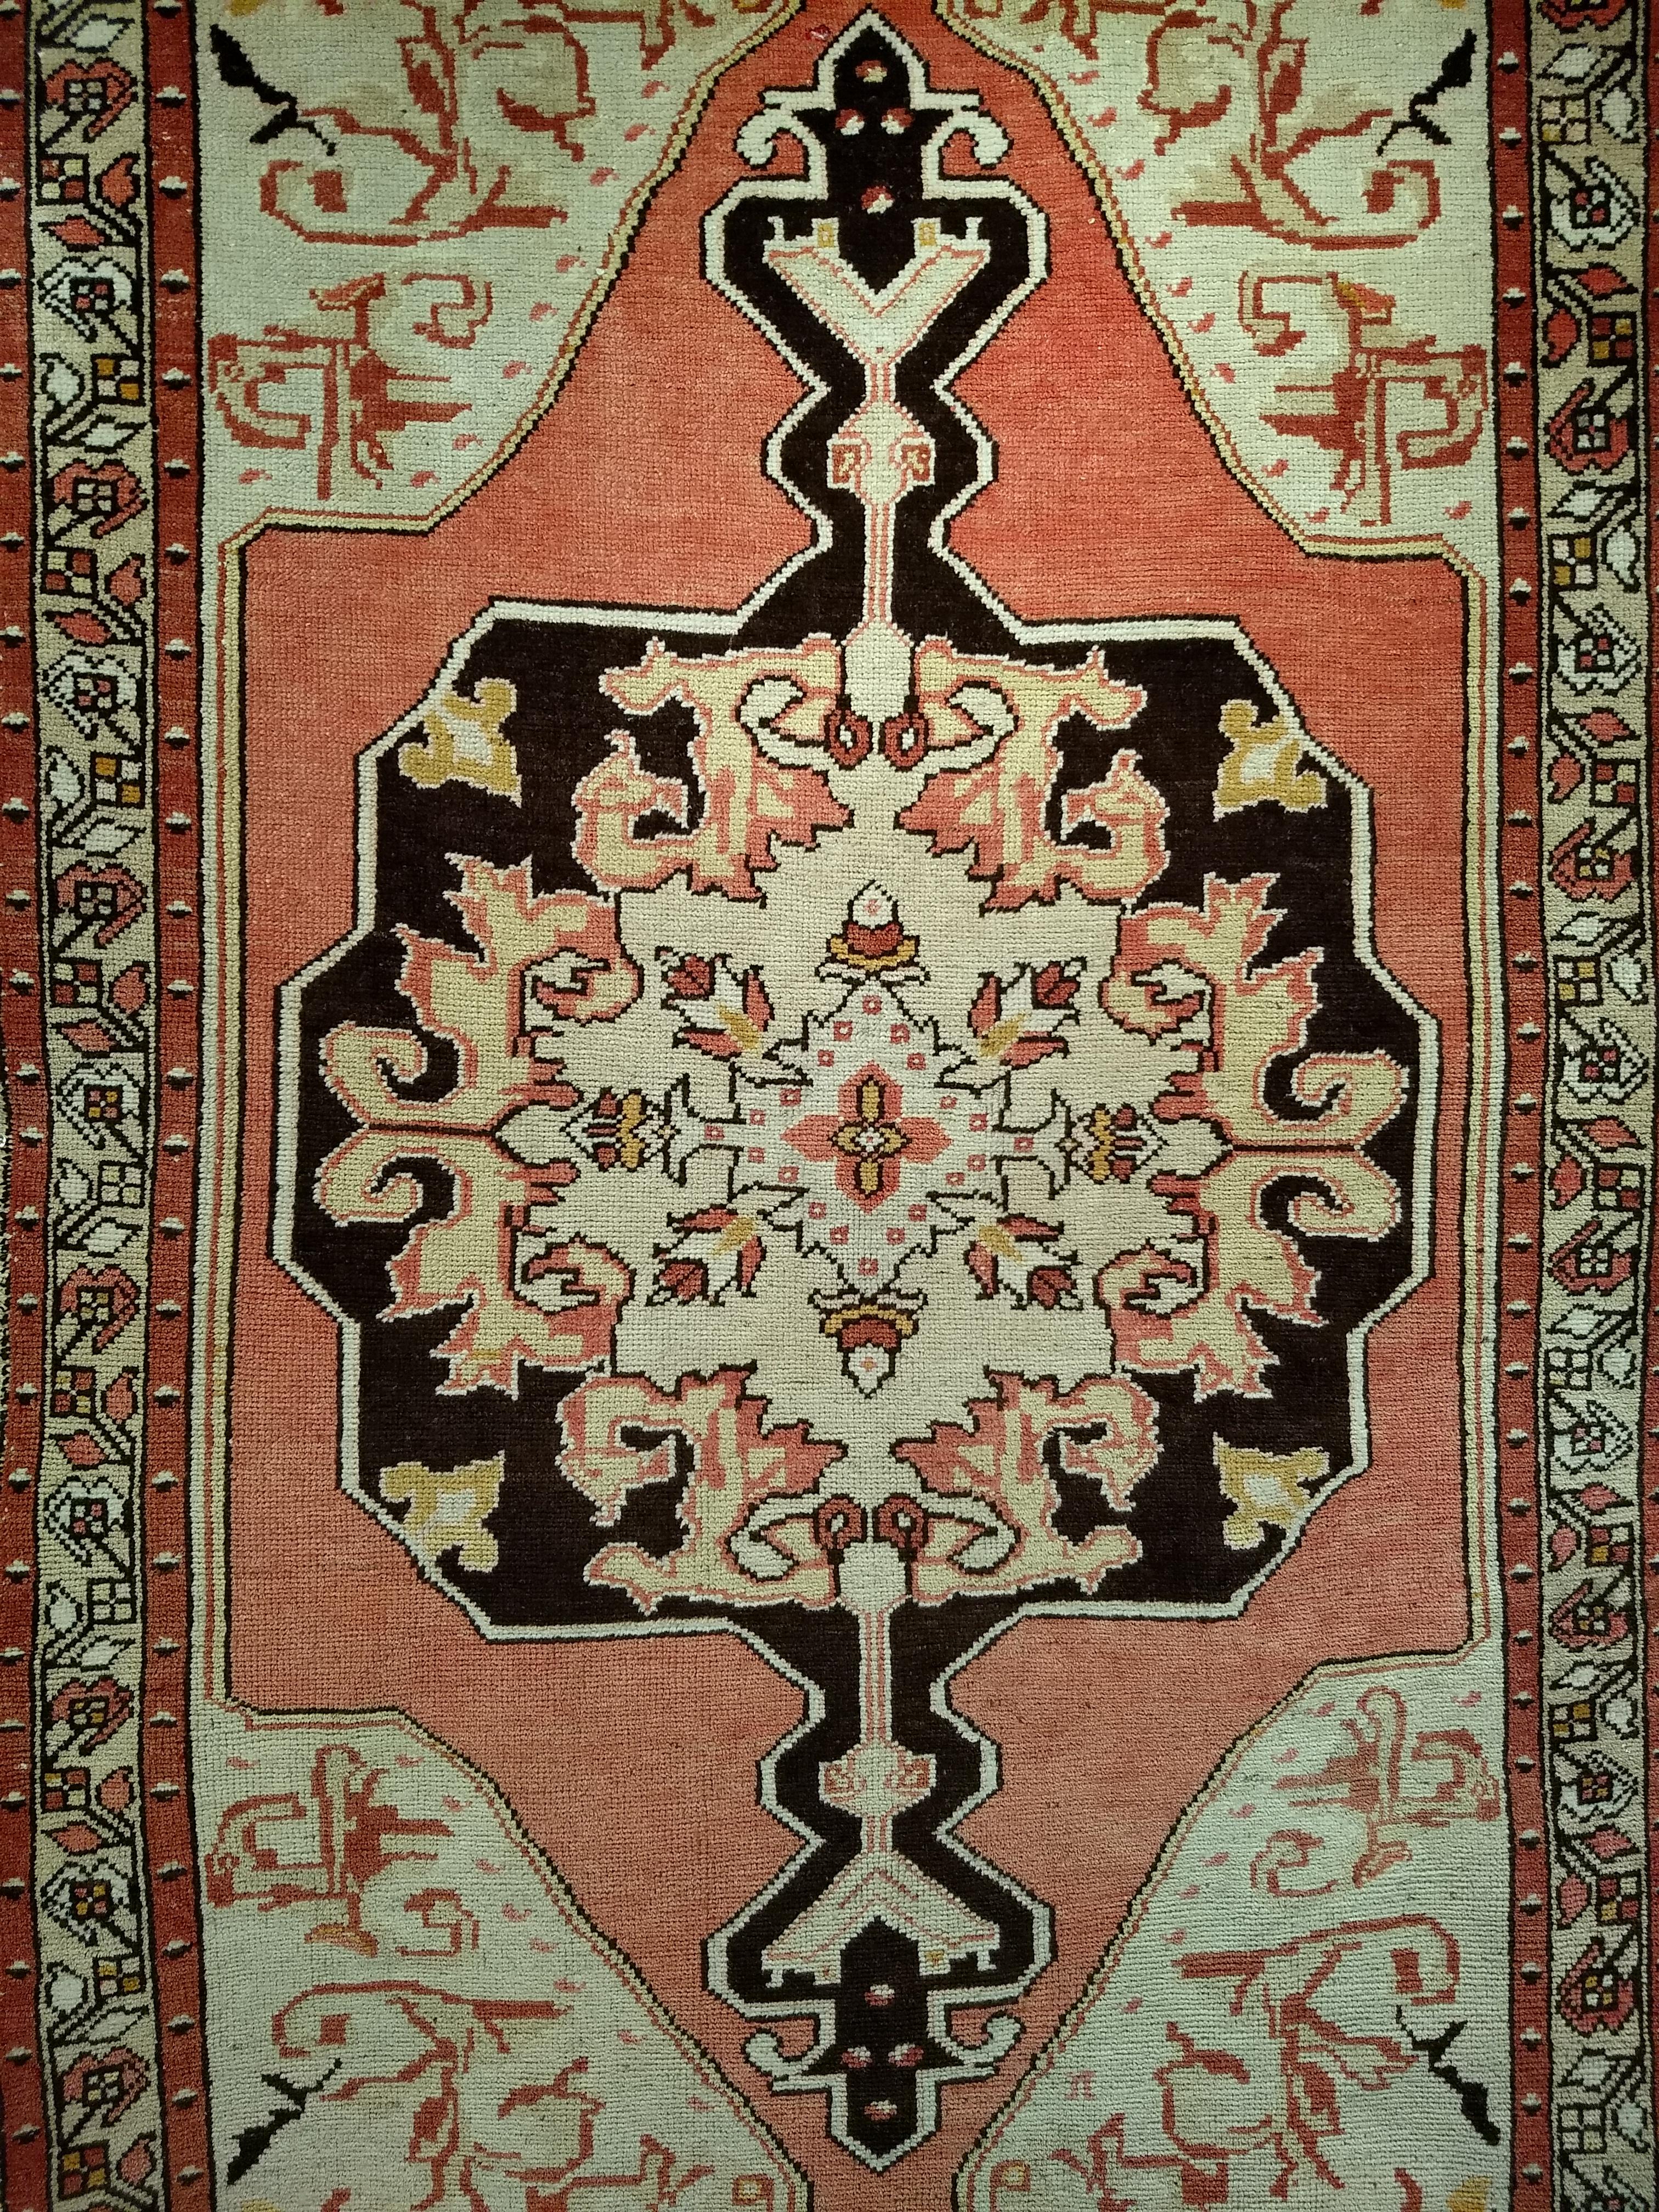 A beautiful Turkish Oushak rug from the early 1900s. The rug has a cream field color and a large central medallion in light red color. The medallion in dark chocolate color is set in a larger medallion in light red color. The combination of mellow